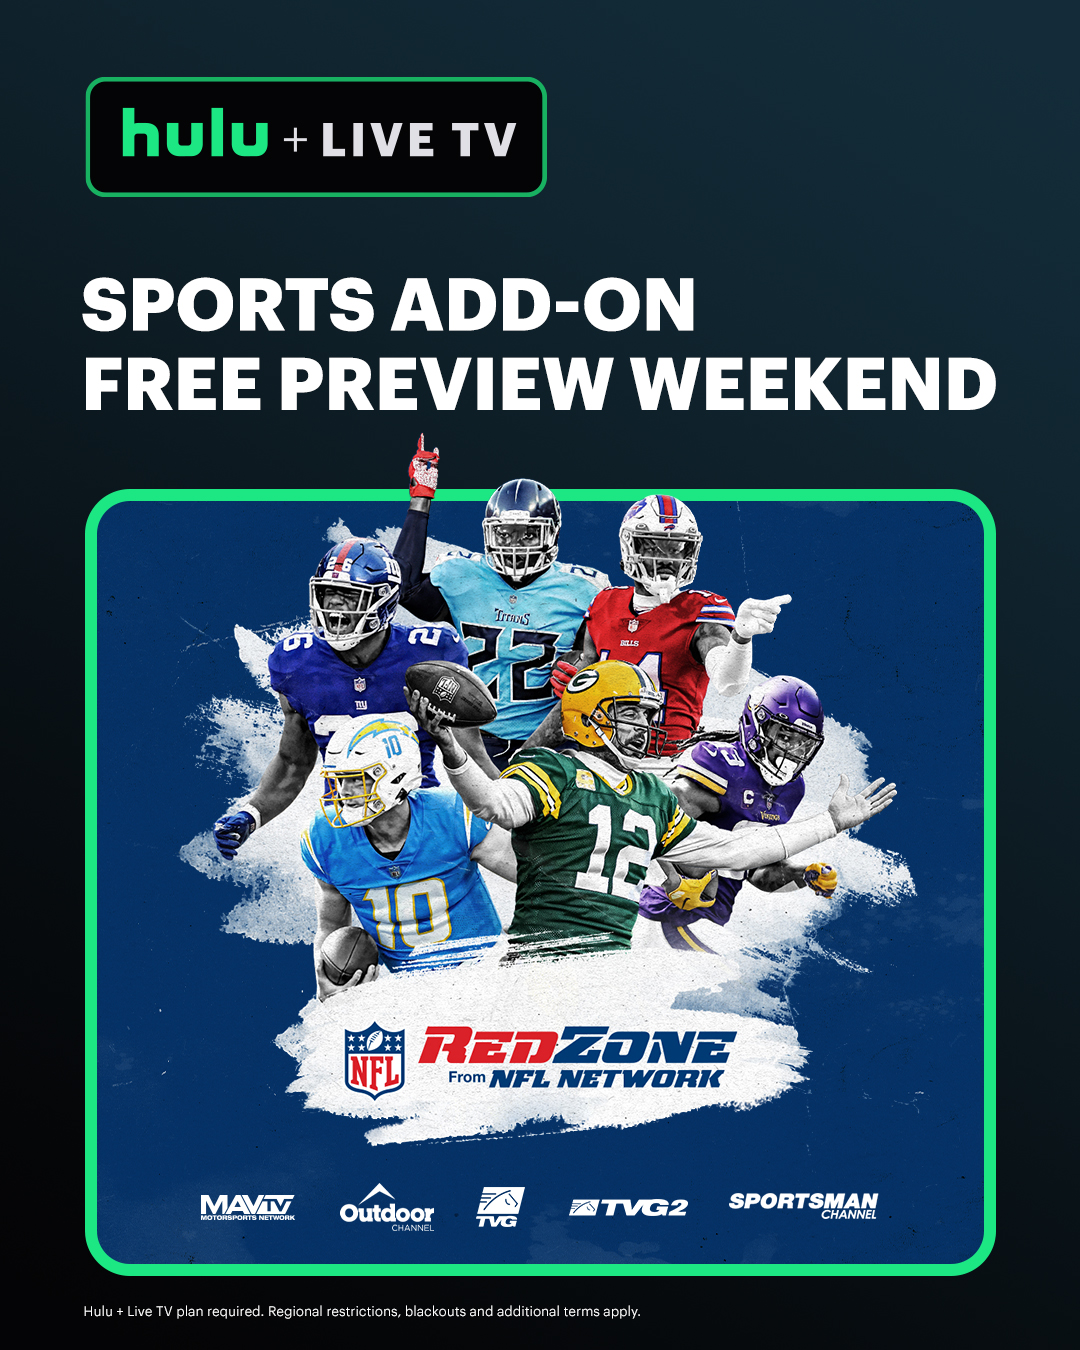 Hulu on X: 'Are you ready for some football? Don't miss a second of  gridiron action with NFL RedZone! Available for Hulu + Live TV subscribers  as part of the Sports Add-On